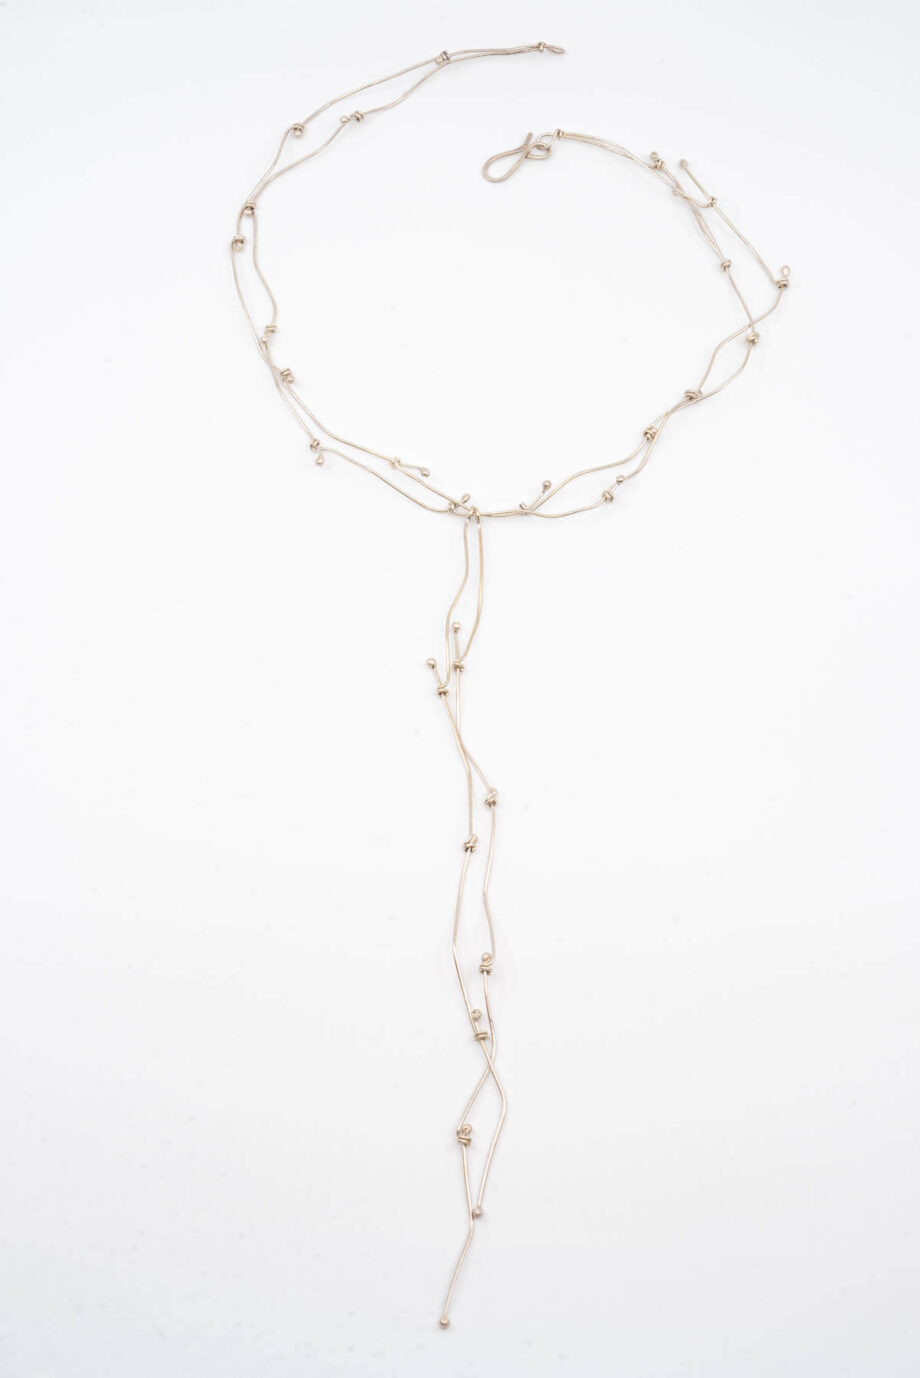 Marilena Synthesis Necklace 76 317